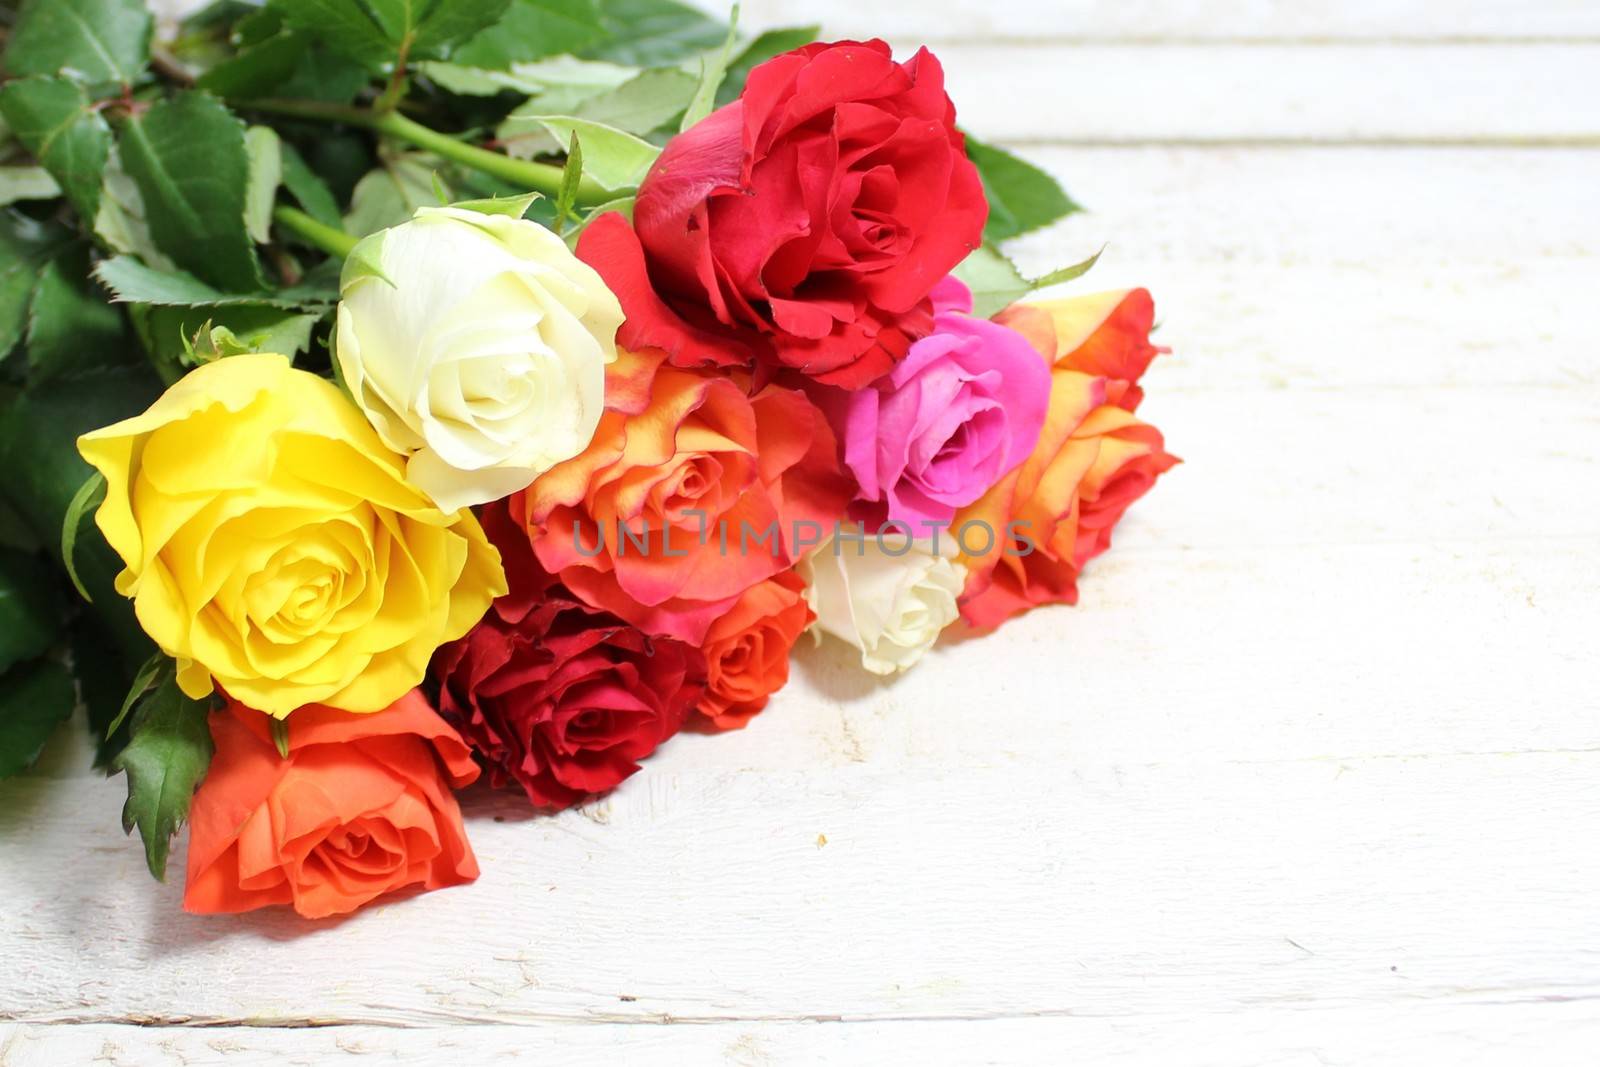 colorful roses on white wood by martina_unbehauen